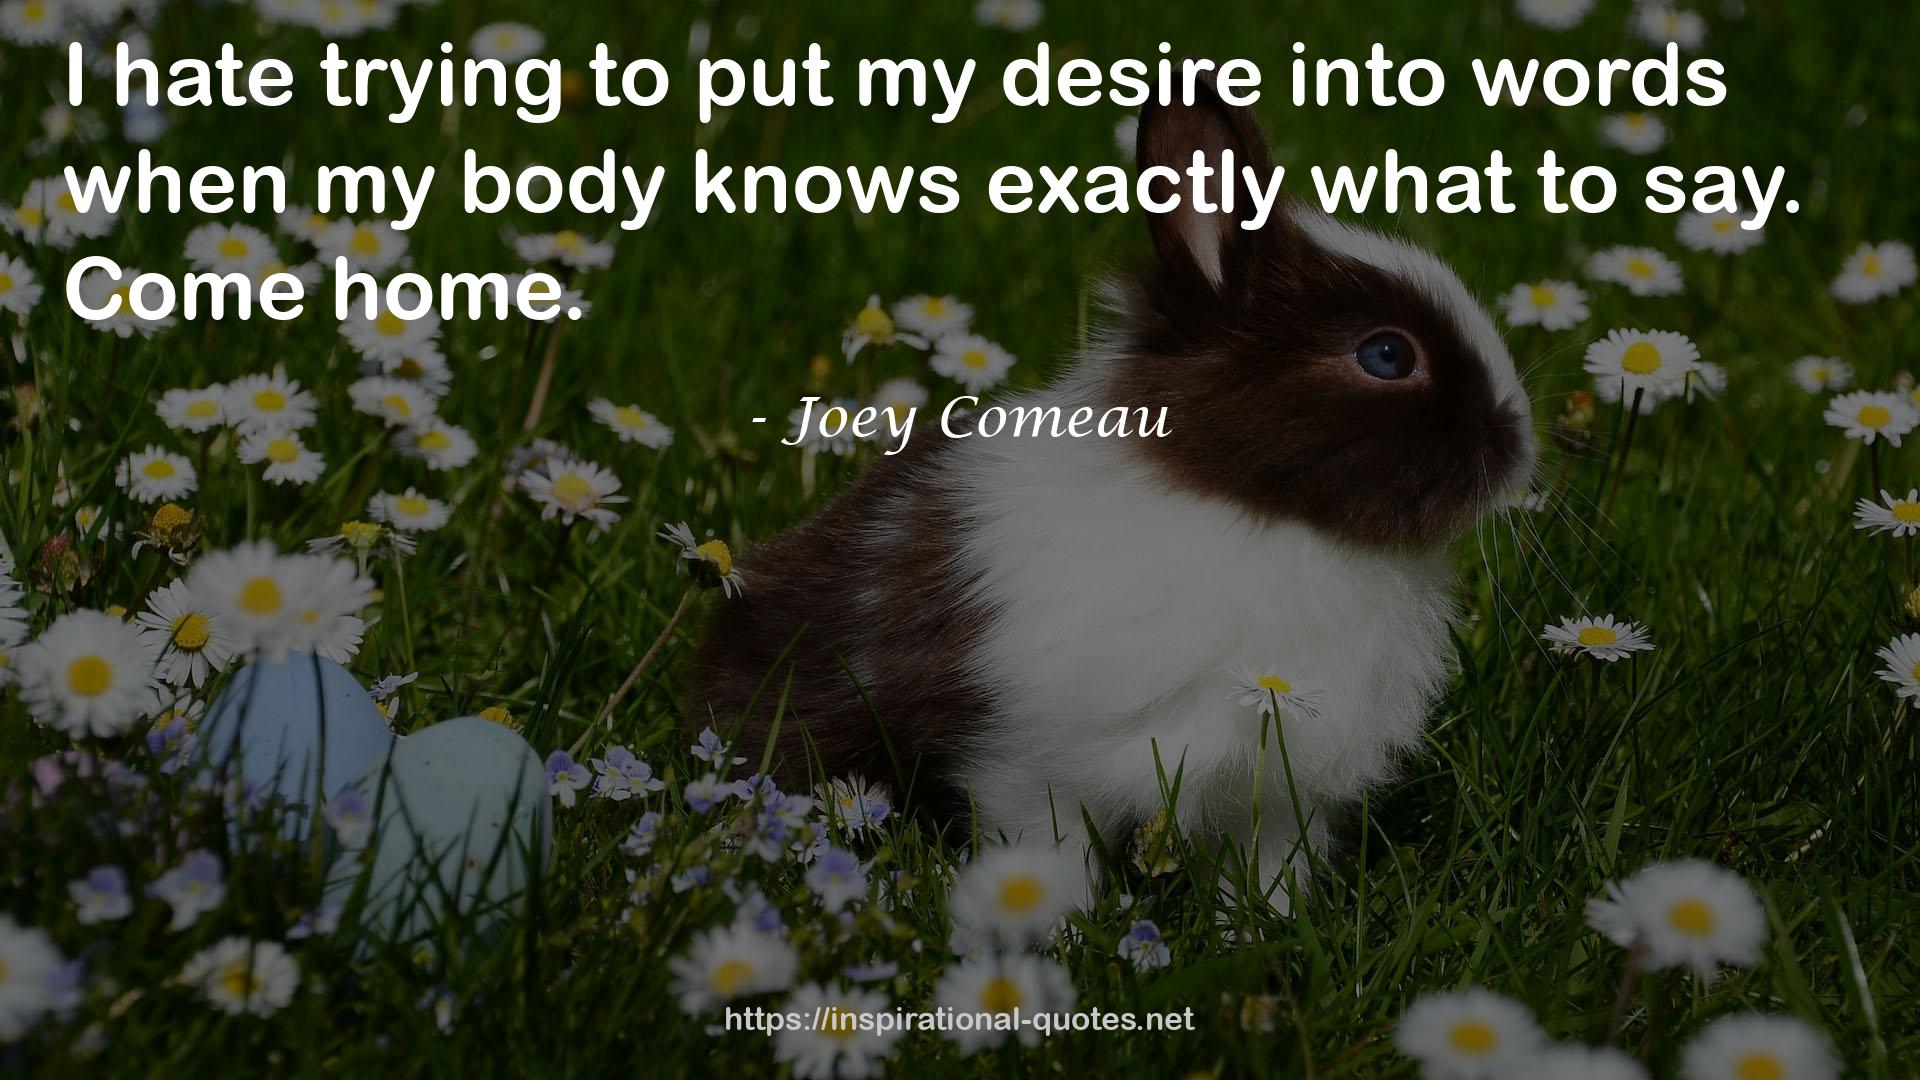 Joey Comeau QUOTES